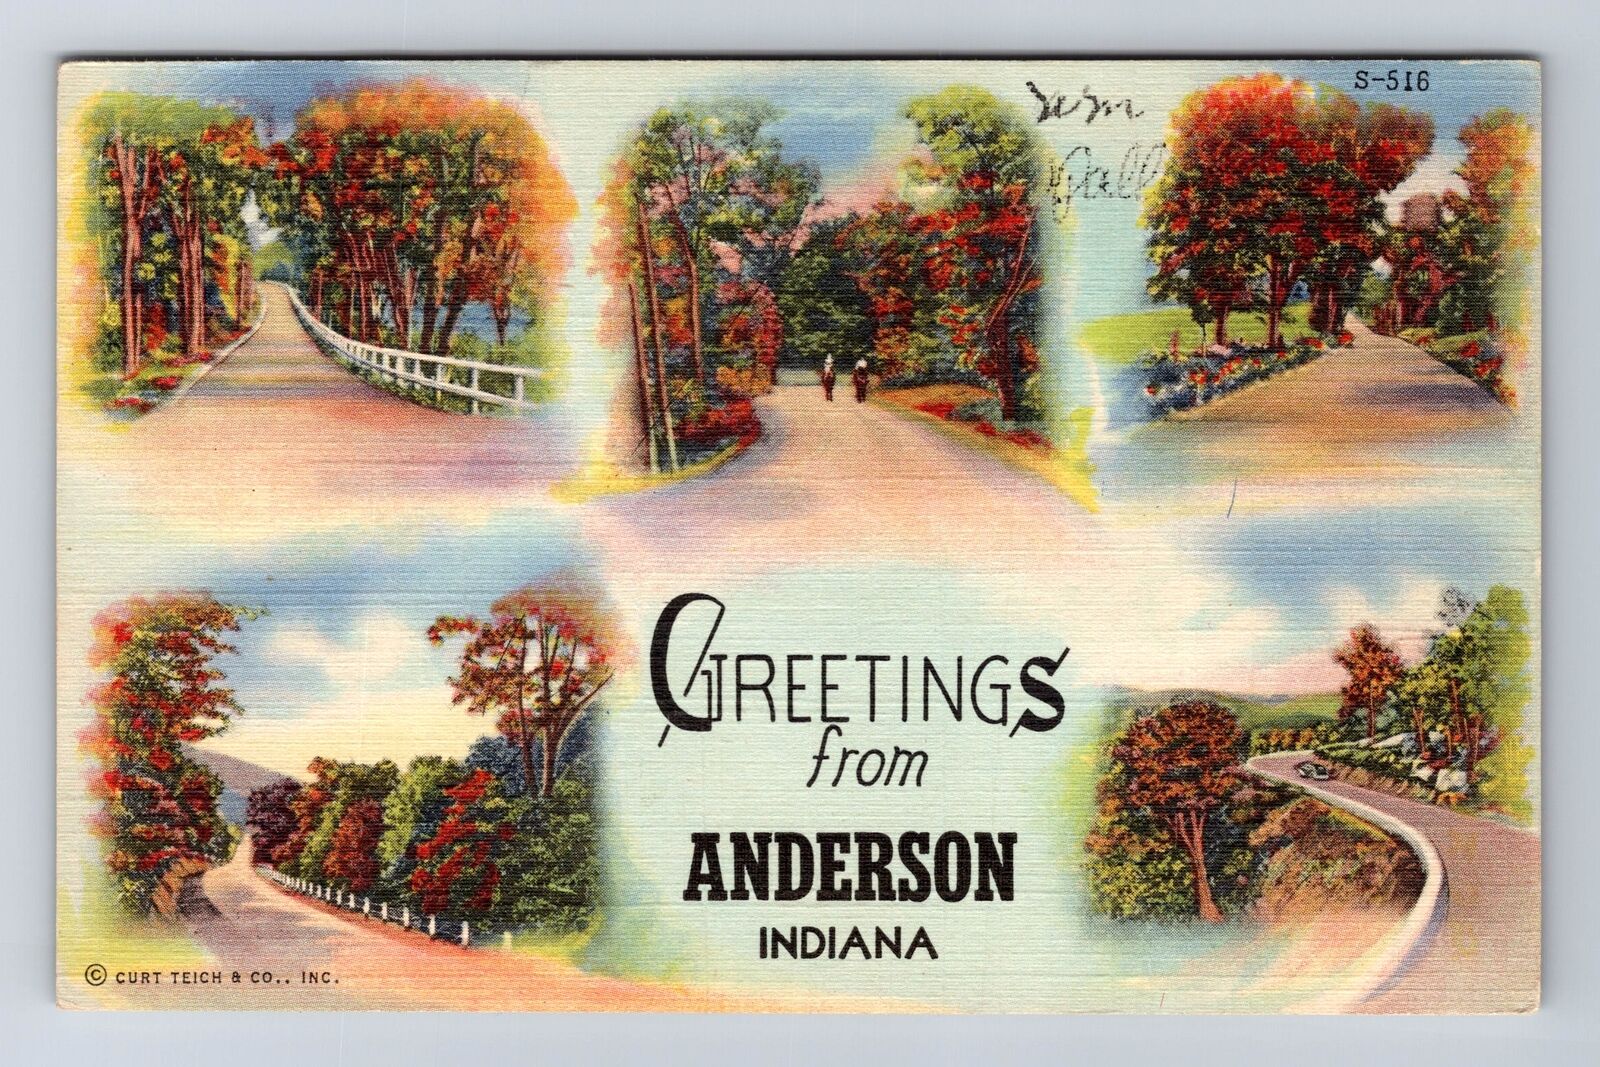 Anderson IN-Indiana, Scenic Greetings, Antique Souvenir Antique Vintage Postcard